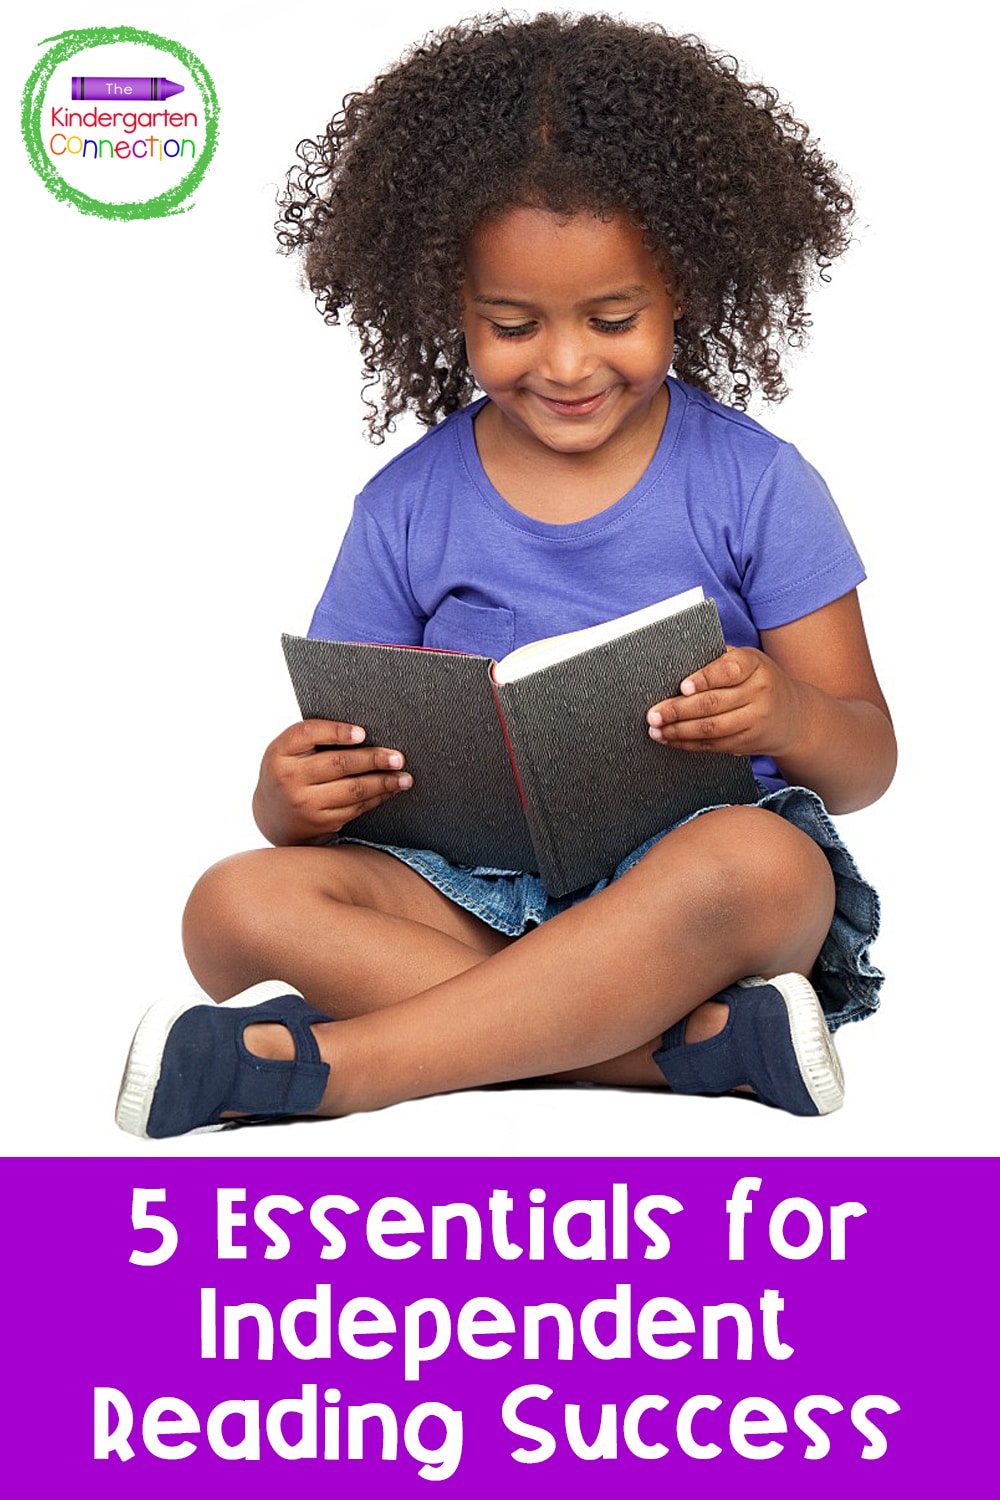 These five independent reading tips are essentials for creating successful readers.